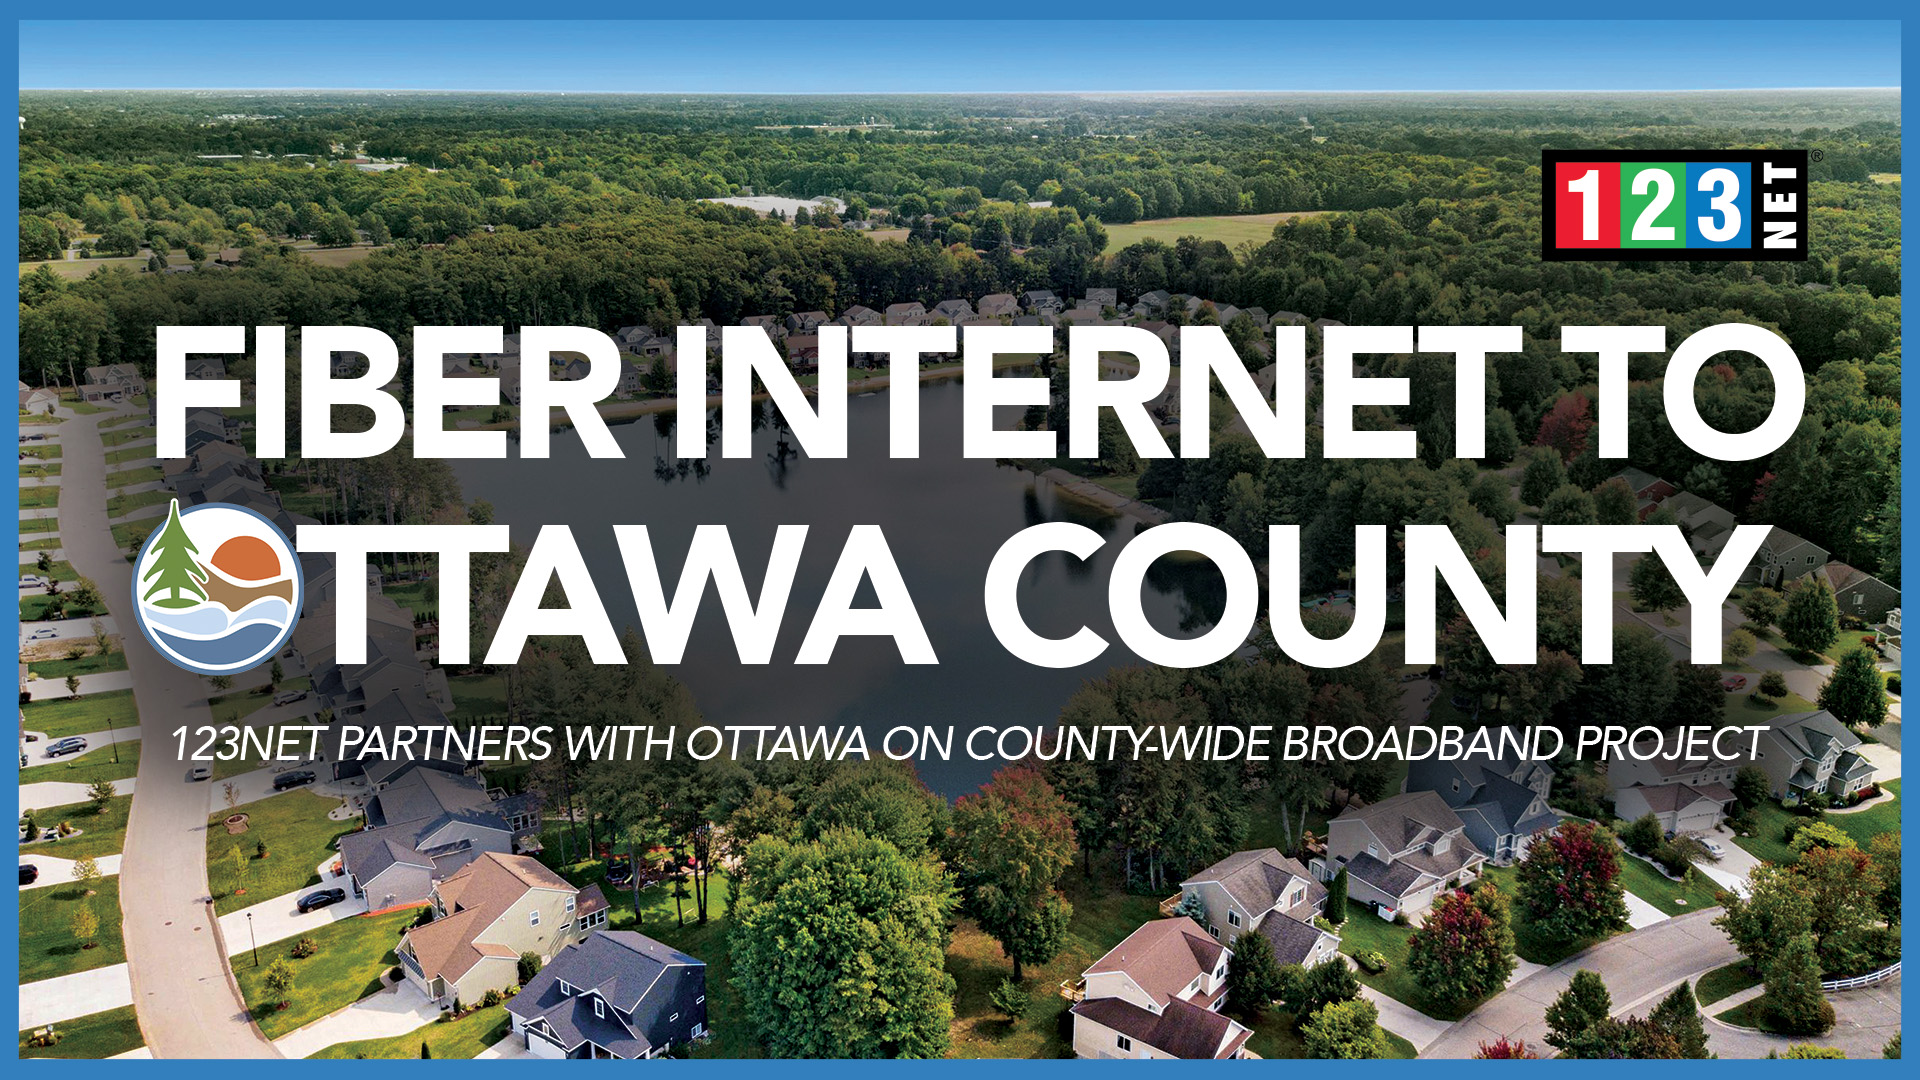 Ottawa County and 123NET Partner on County-wide Broadband Project